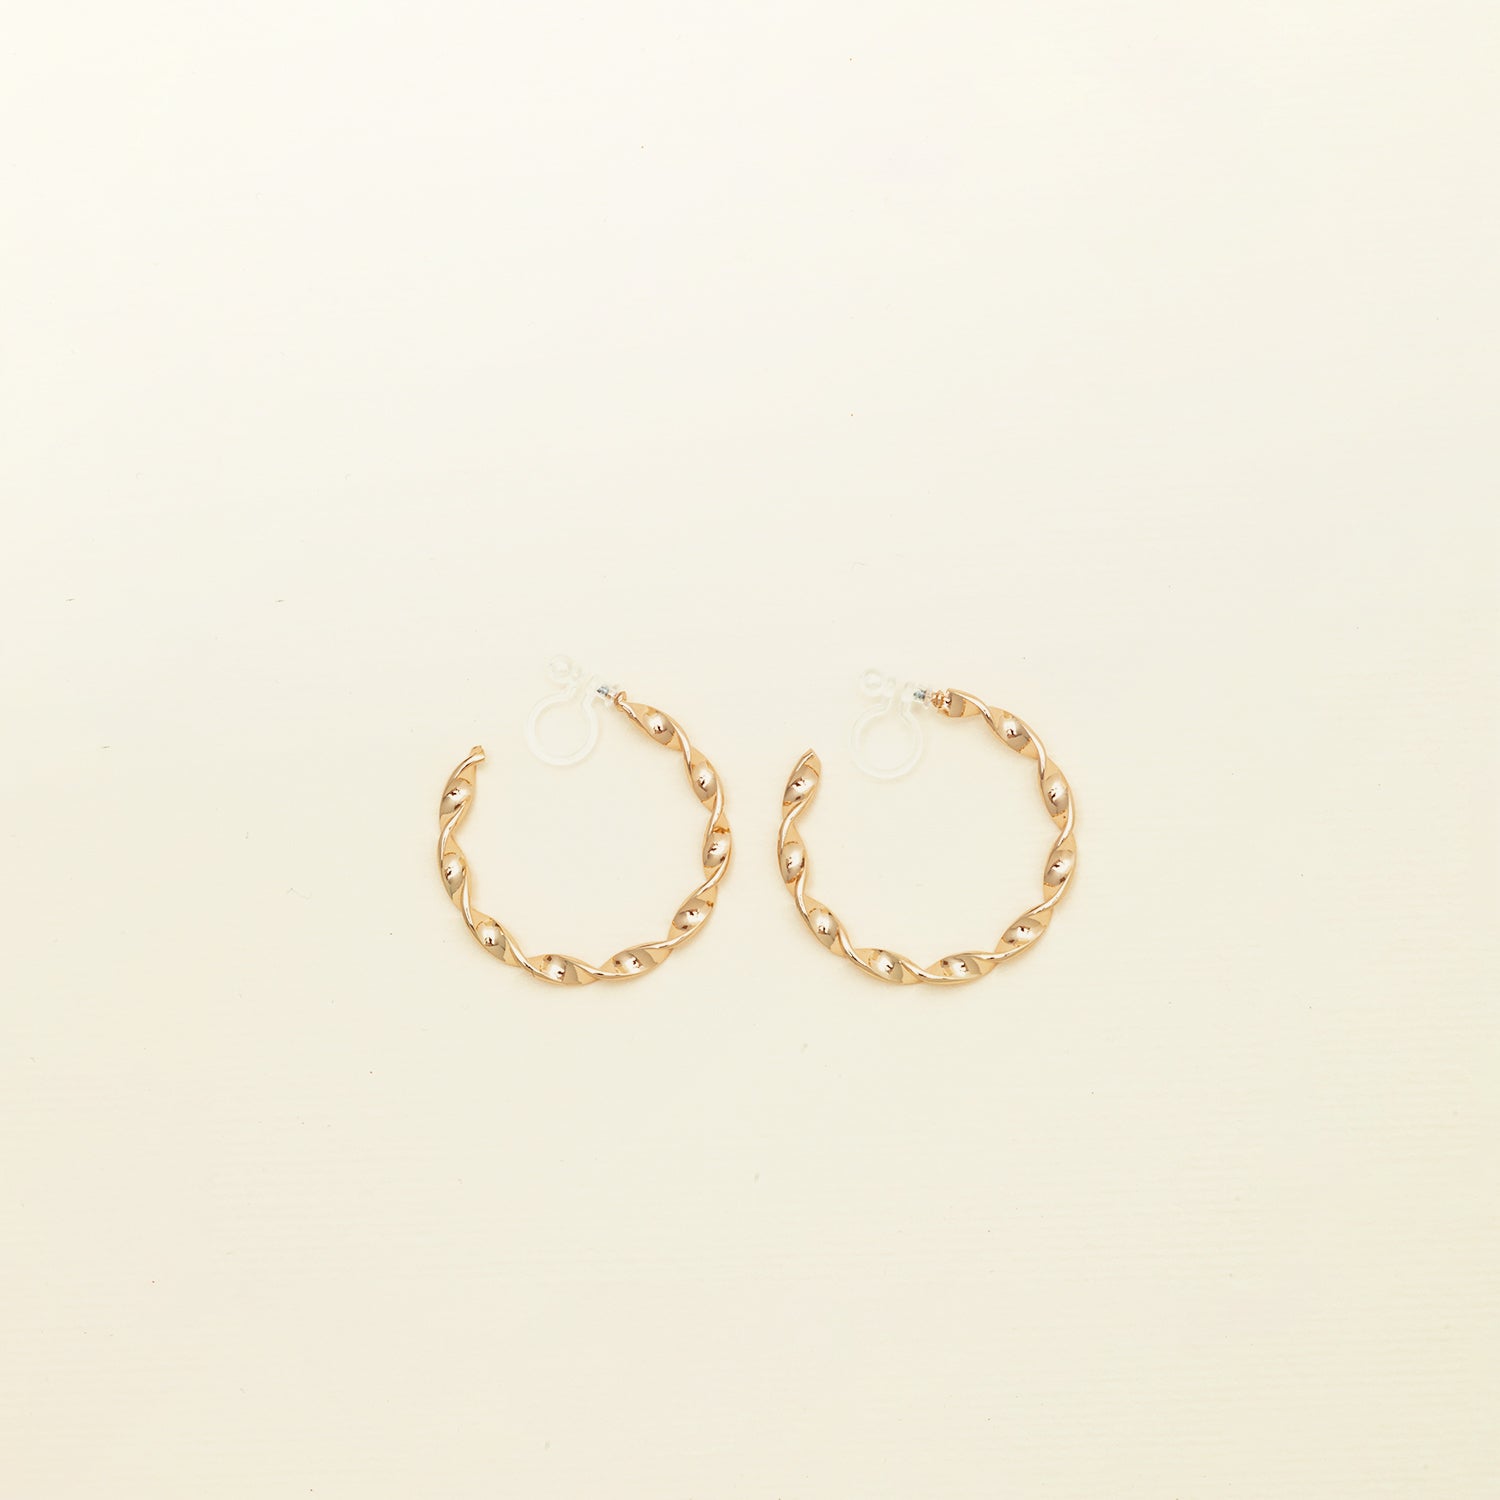 Image of the Gold Wave Hoop Clip-On Earrings boast a closure type of resin clip-on, ideal for the vast majority of ear types. Average wear duration ranges from 8-12 hours, offering medium secure hold with no ability to adjust. Crafted from gold tone metal alloy, this item comes as one pair and is also available in silver.